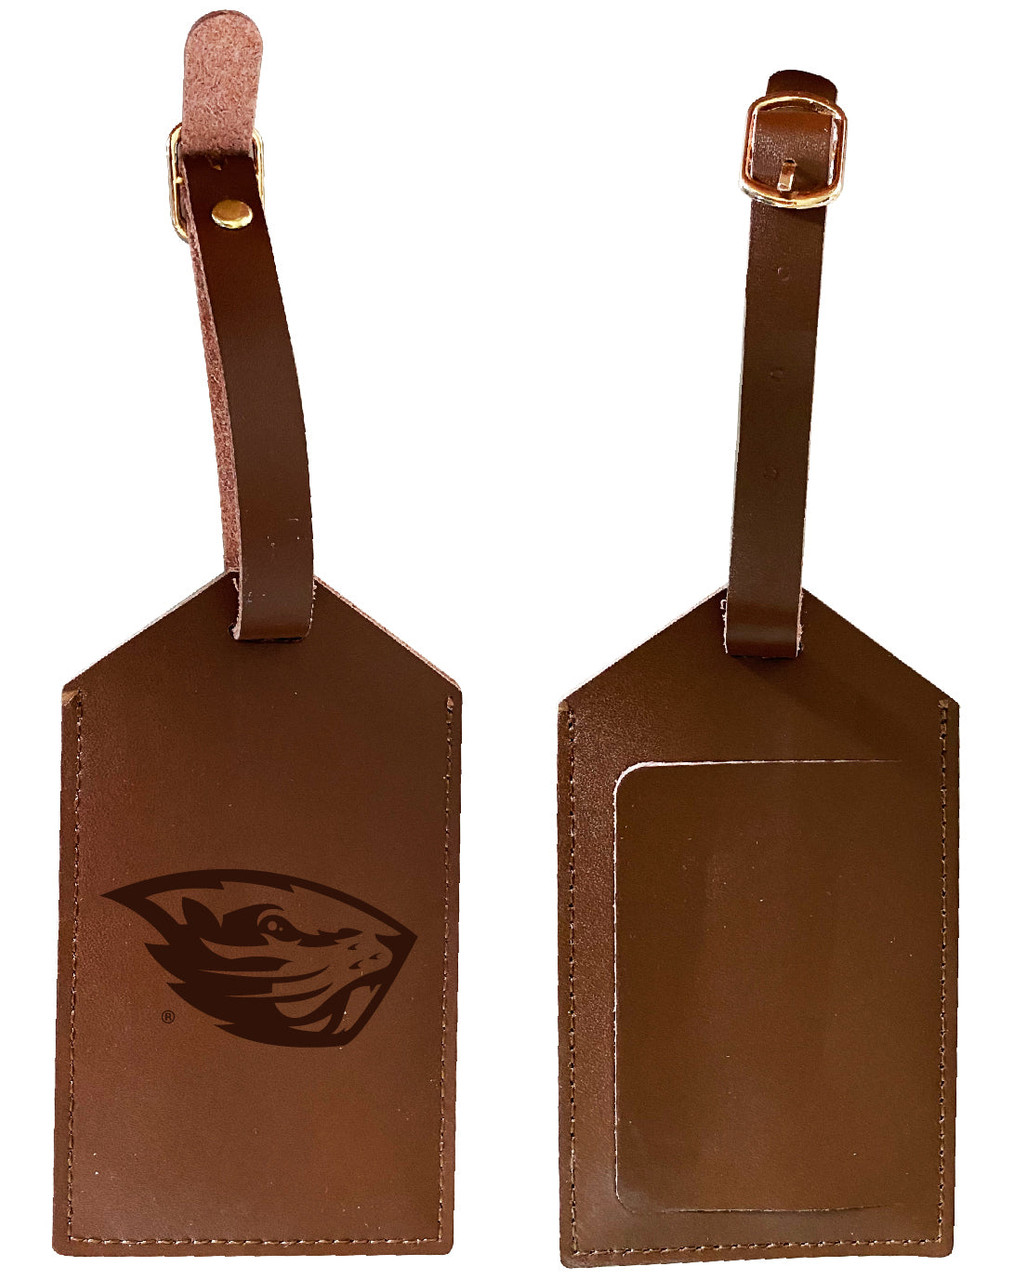 Oregon State Beavers Leather Luggage Tag Engraved